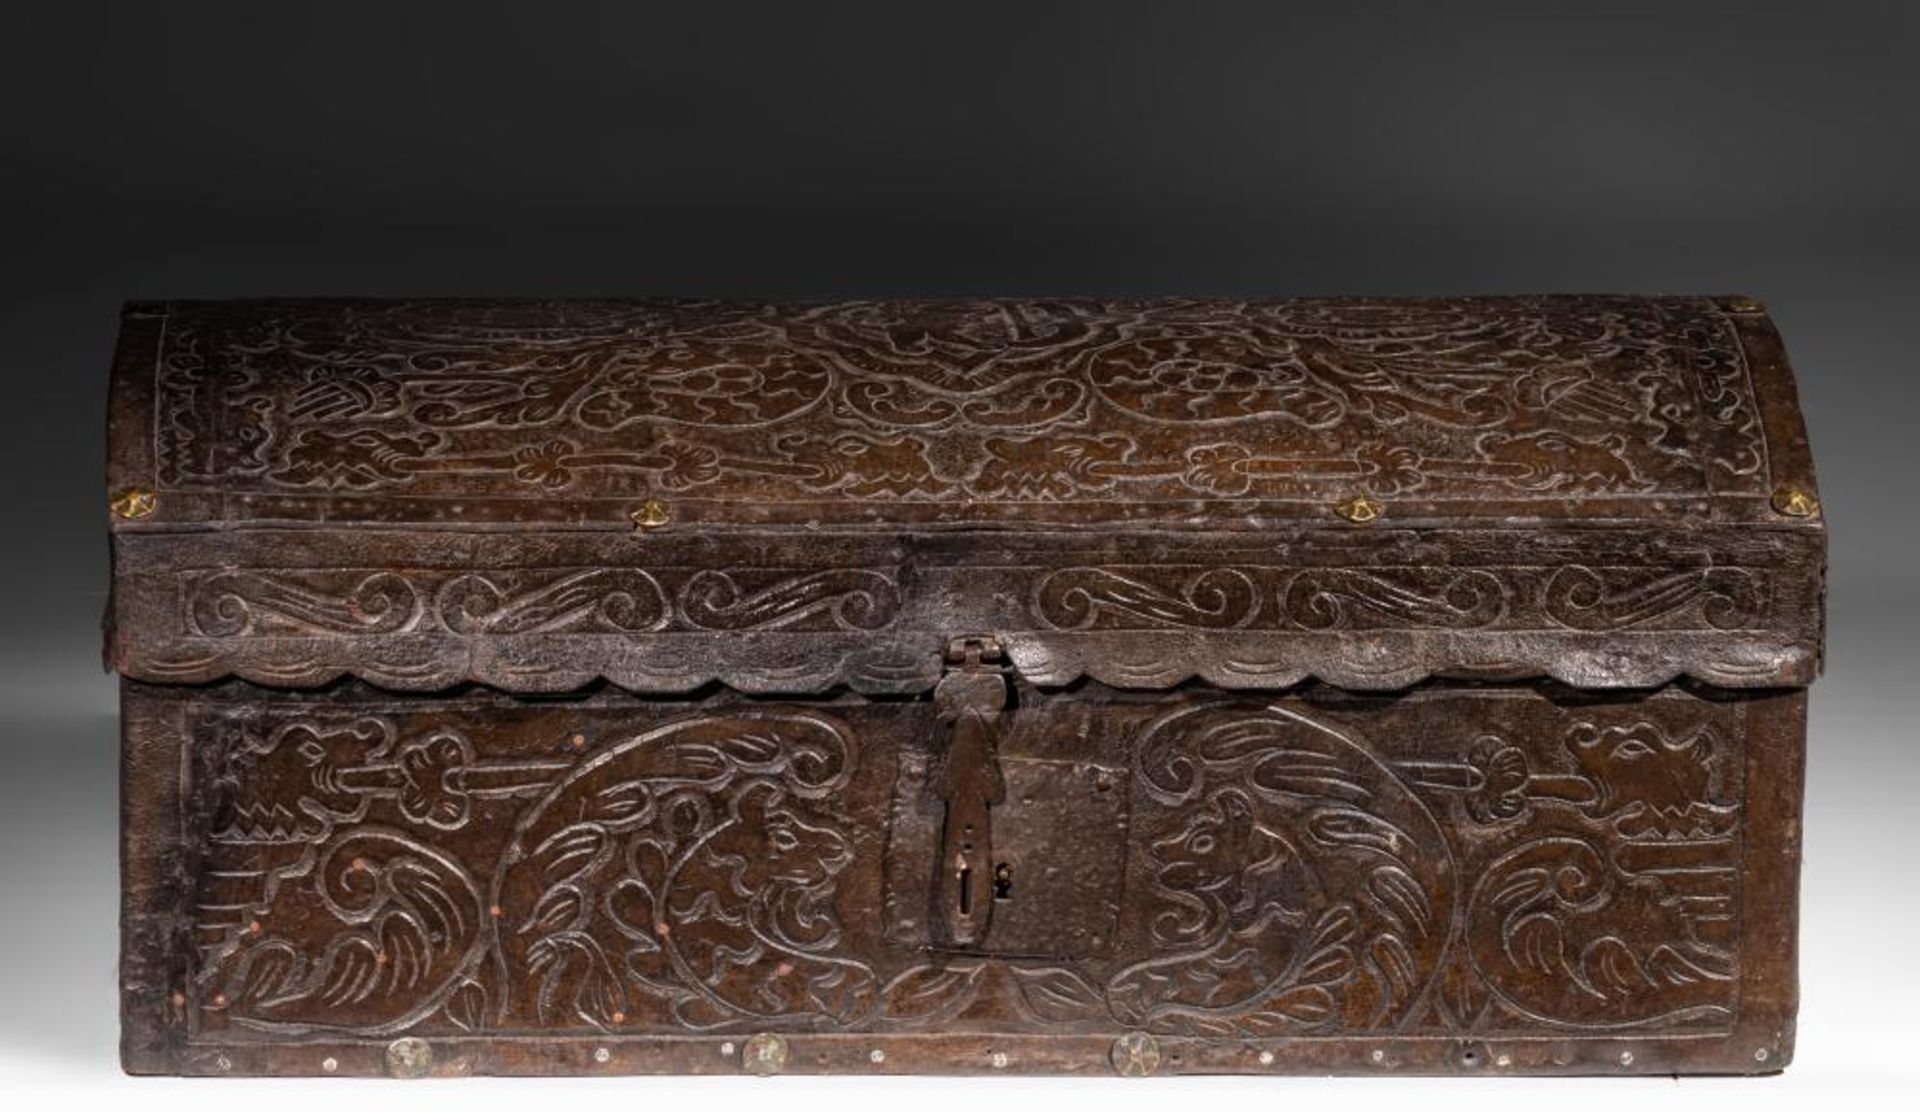 Colonial chest in embossed leather, Peruvian Viceregal work of the 17th century - Image 4 of 9